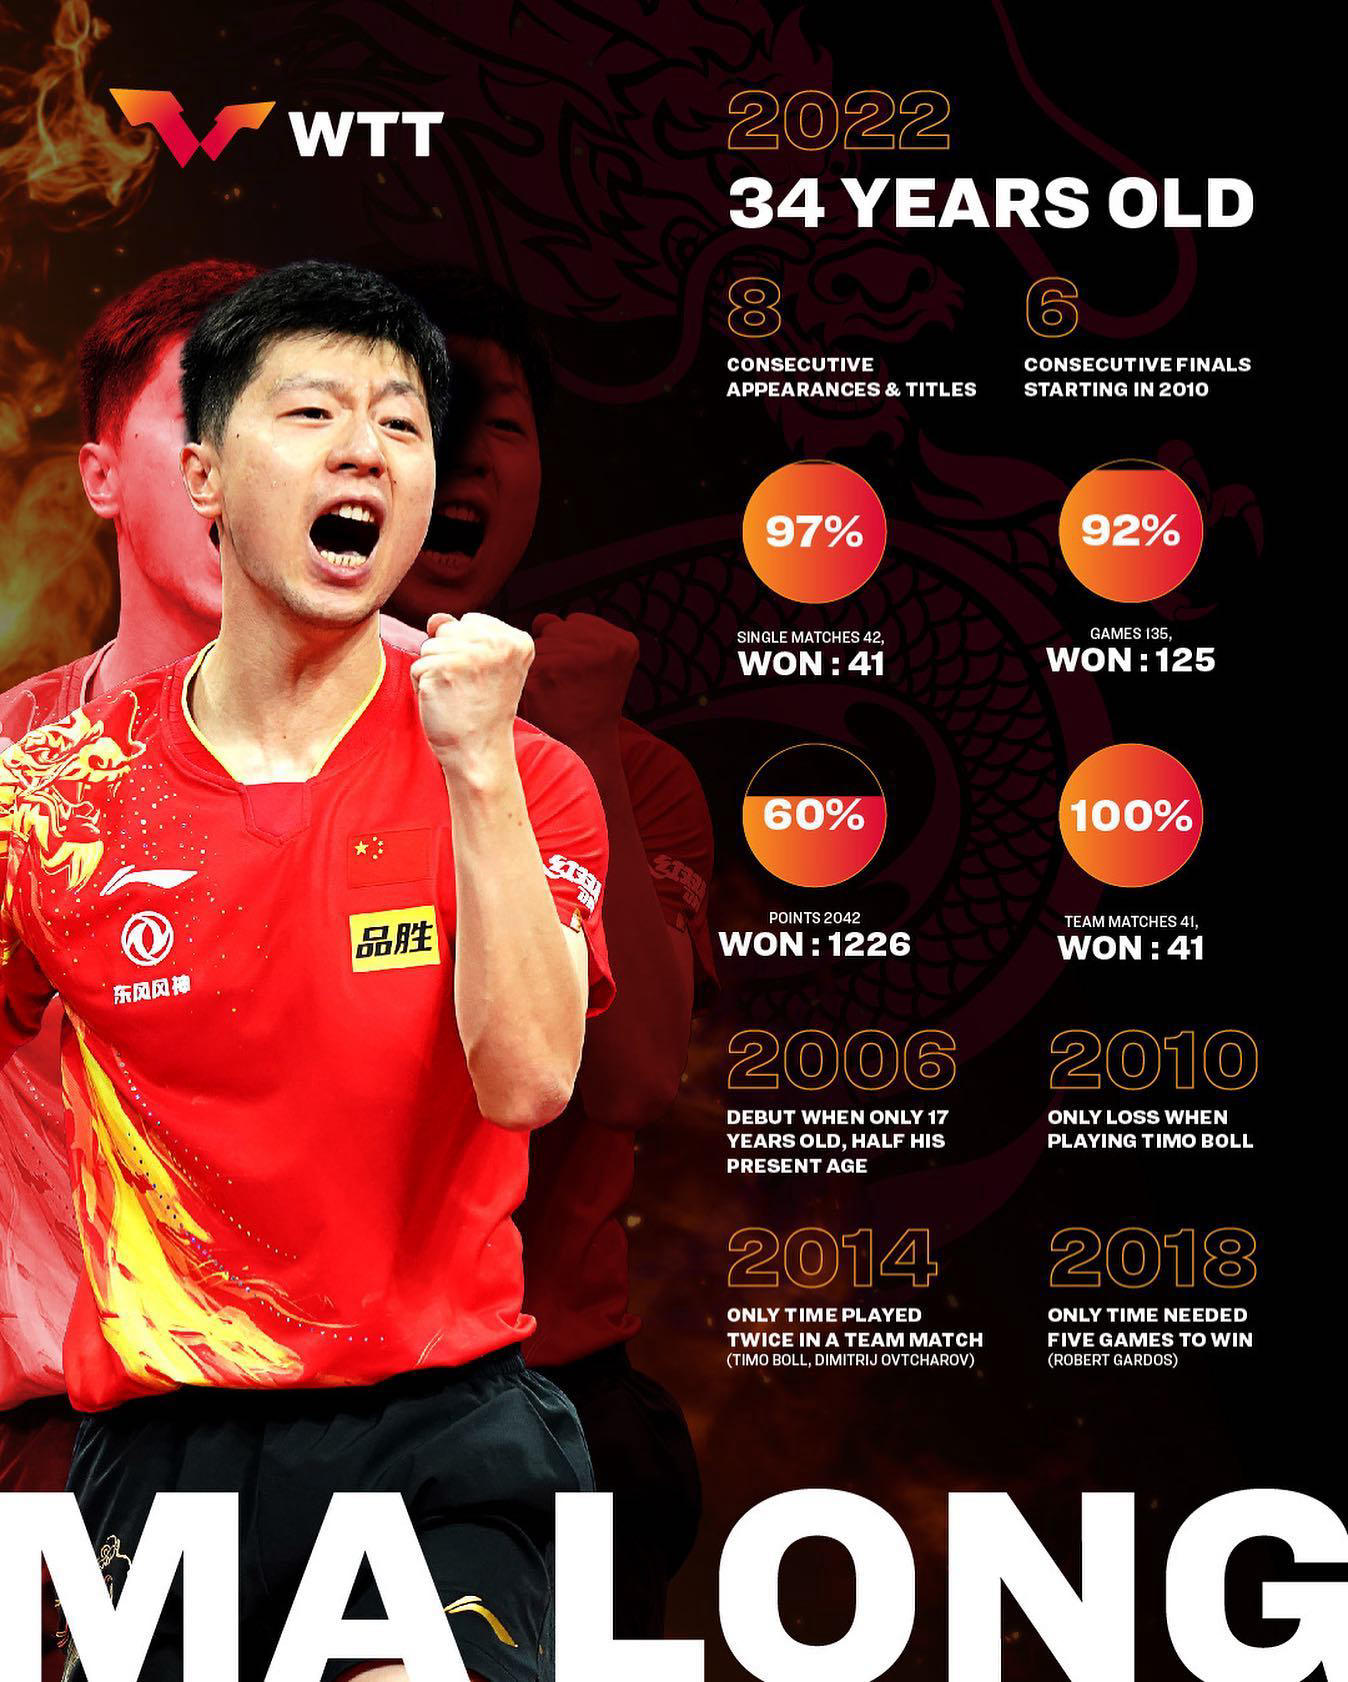 World Table Tennis - #DidYouKnow these interesting World Team Championships stats about the timeless